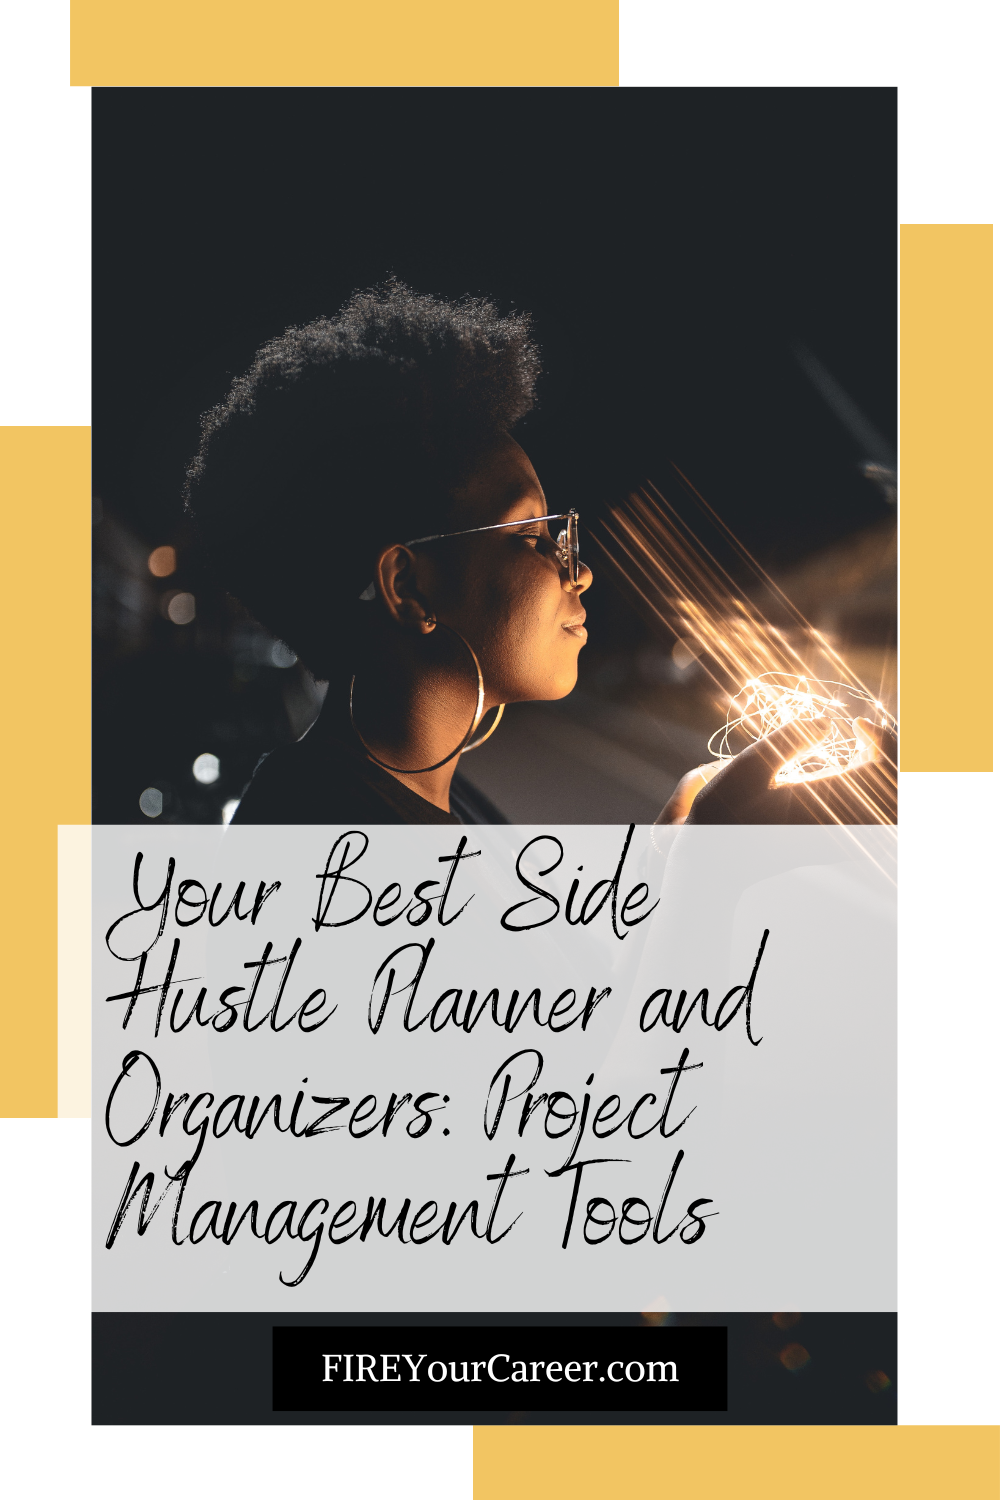 Your Best Side Hustle Planner and Organizers Project Management Tools Pinterest V2